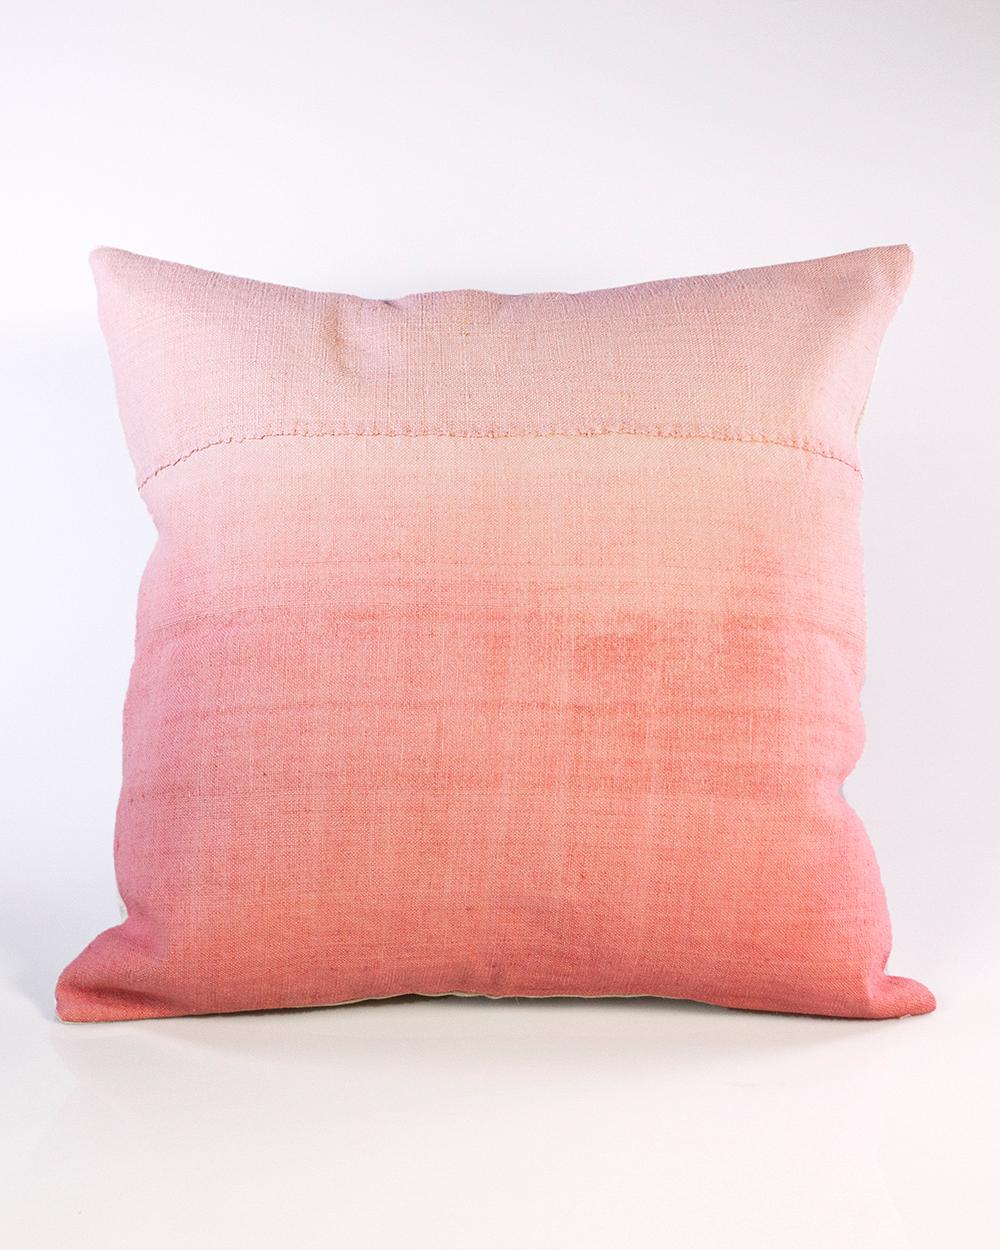 Hand-Crafted Espanyolet Pink Ombre Hand-Painted Vintage Linen Pillow 24